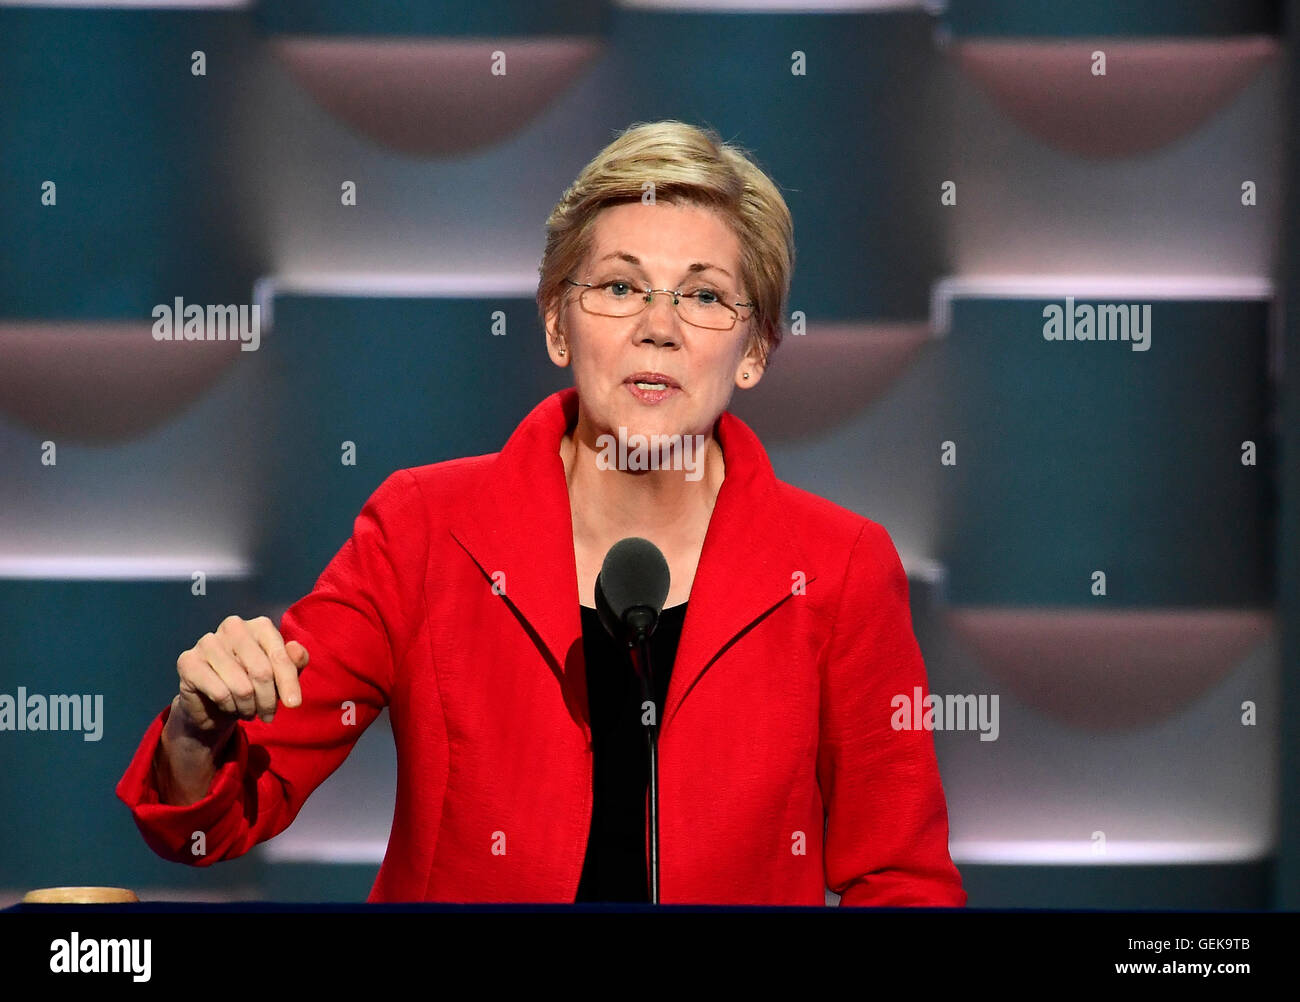 Philadelphia, Us. 25th July, 2016. United States Senator Elizabeth Warren (Democrat of Massachusetts) makes remarks at the 2016 Democratic National Convention at the Wells Fargo Center in Philadelphia, Pennsylvania on Monday, July 25, 2016. Credit: Ron Sachs/CNP (RESTRICTION: NO New York or New Jersey Newspapers or newspapers within a 75 mile radius of New York City) - NO WIRE SERVICE - © dpa/Alamy Live News Stock Photo